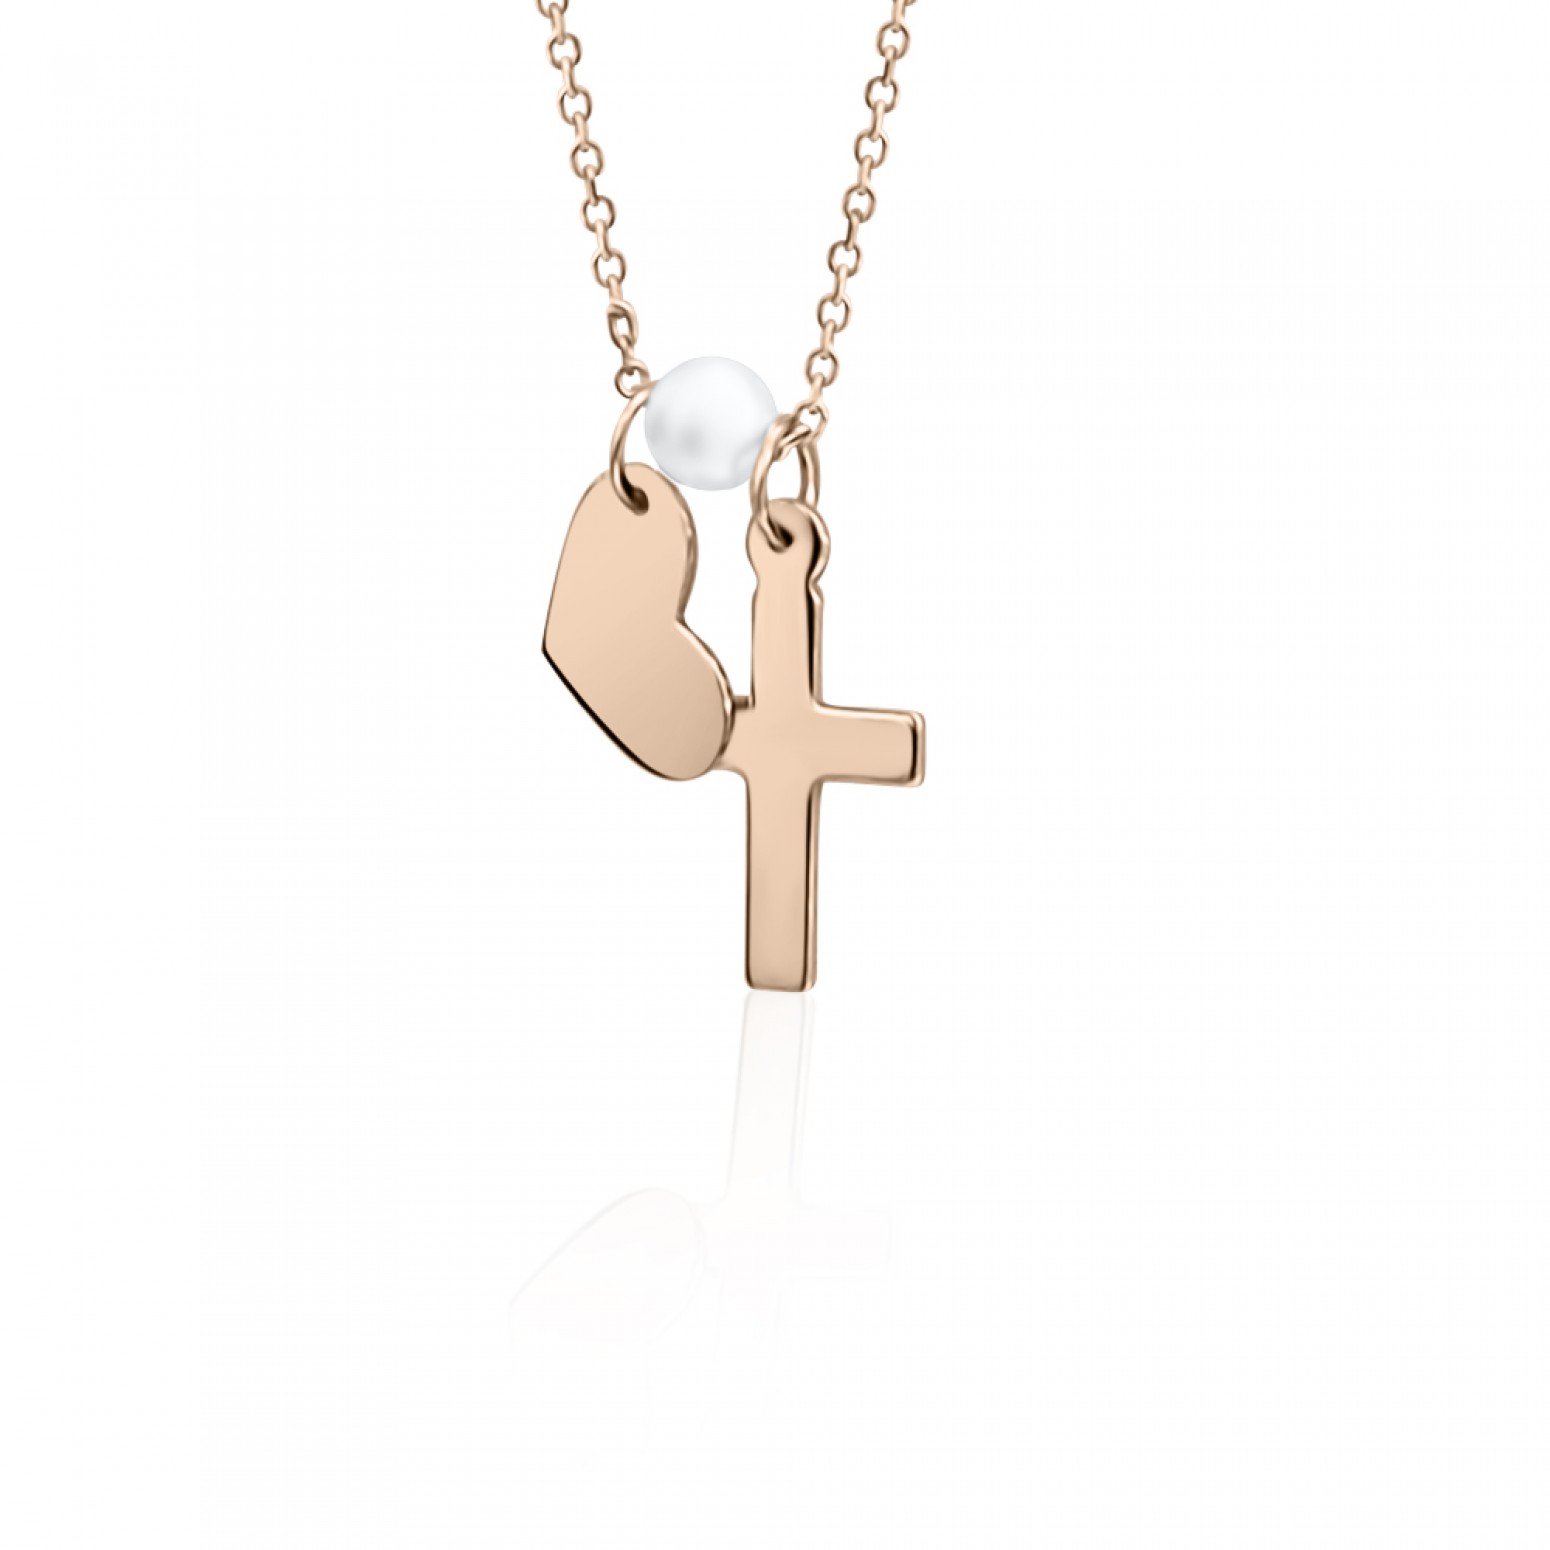 Necklace with heart and cross, Κ9 pink gold with pearl, ko4962 NECKLACES Κοσμηματα - chrilia.gr